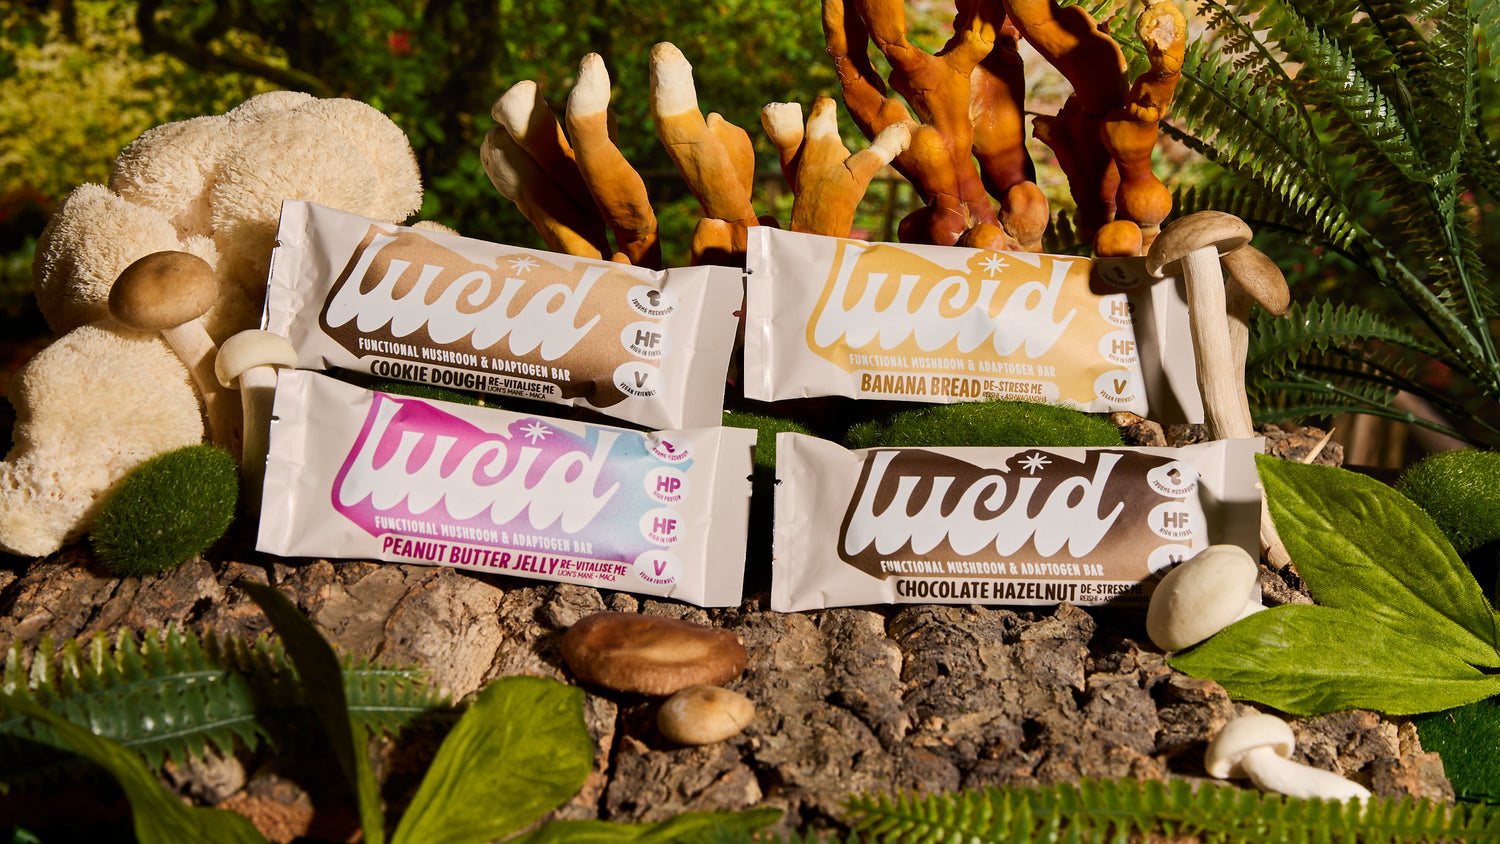 Image of all four Lucid flavours set amidst a natural backdrop of various mushrooms, including reishi and lion's mane, and greenery, with clear text and health benefit icons visible on the packaging.